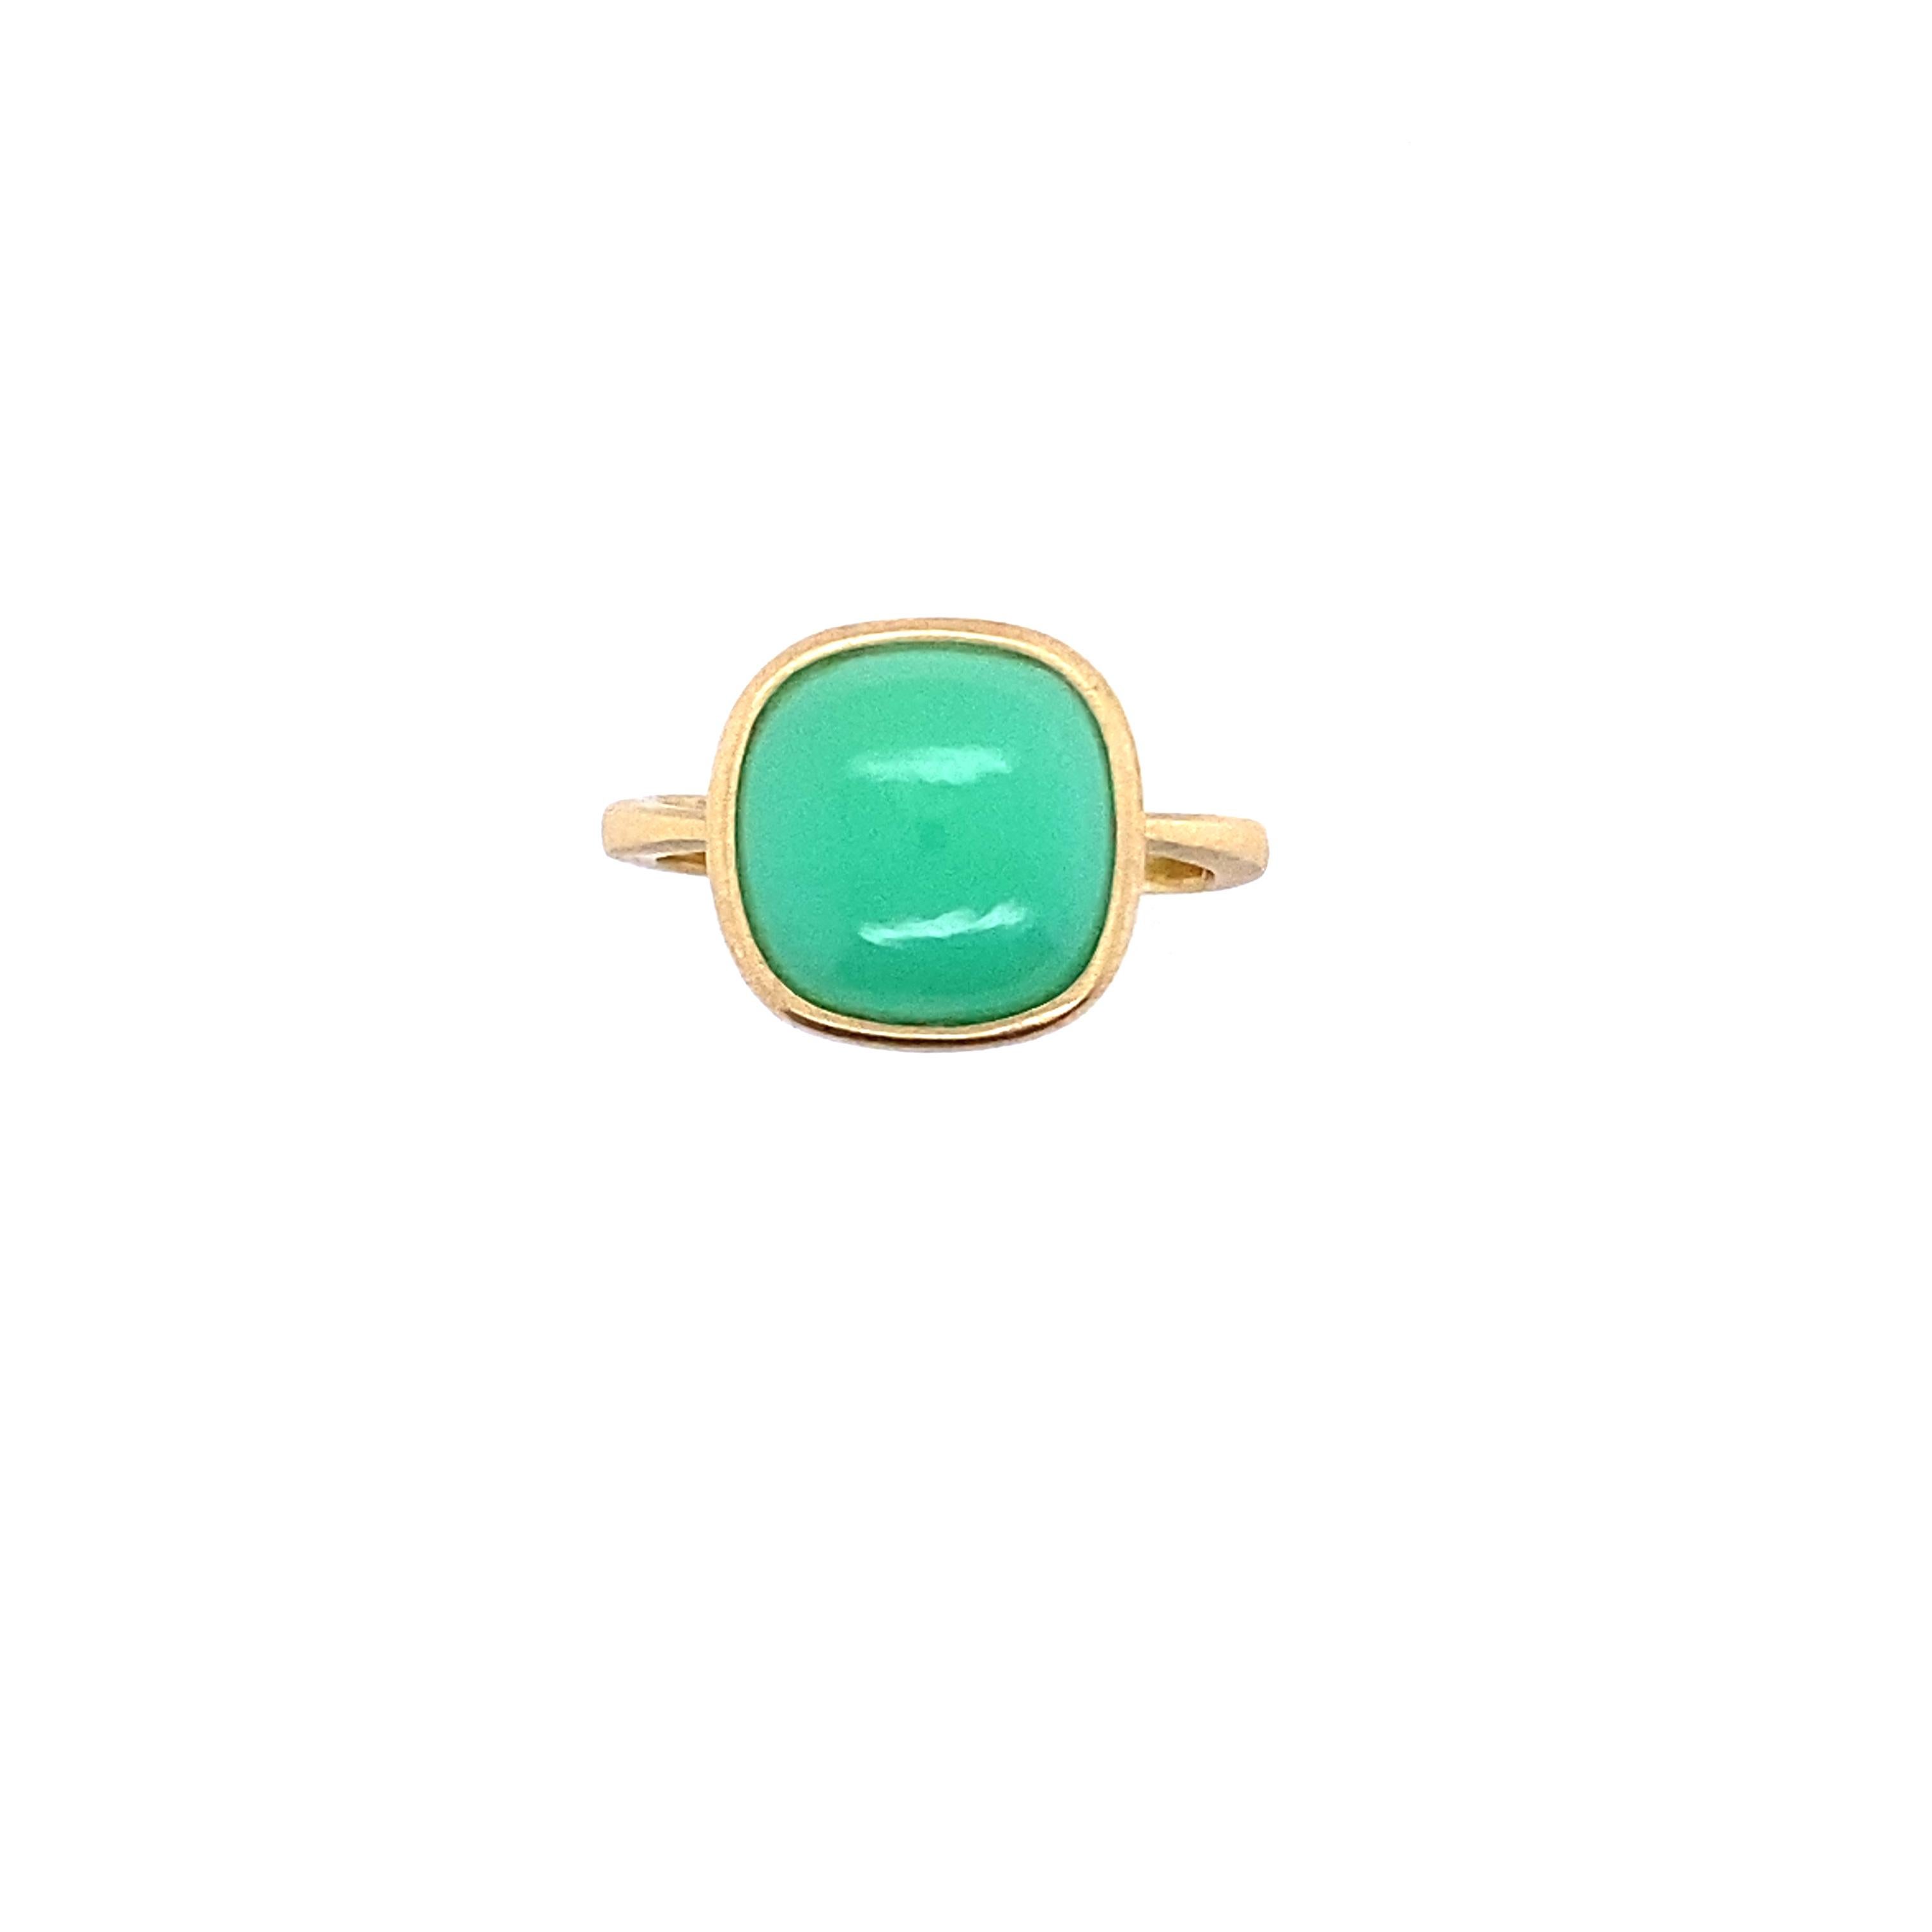 Brushed Yellow Gold with a Cabochon Crisaprasio Cocktail Ring For Sale 2